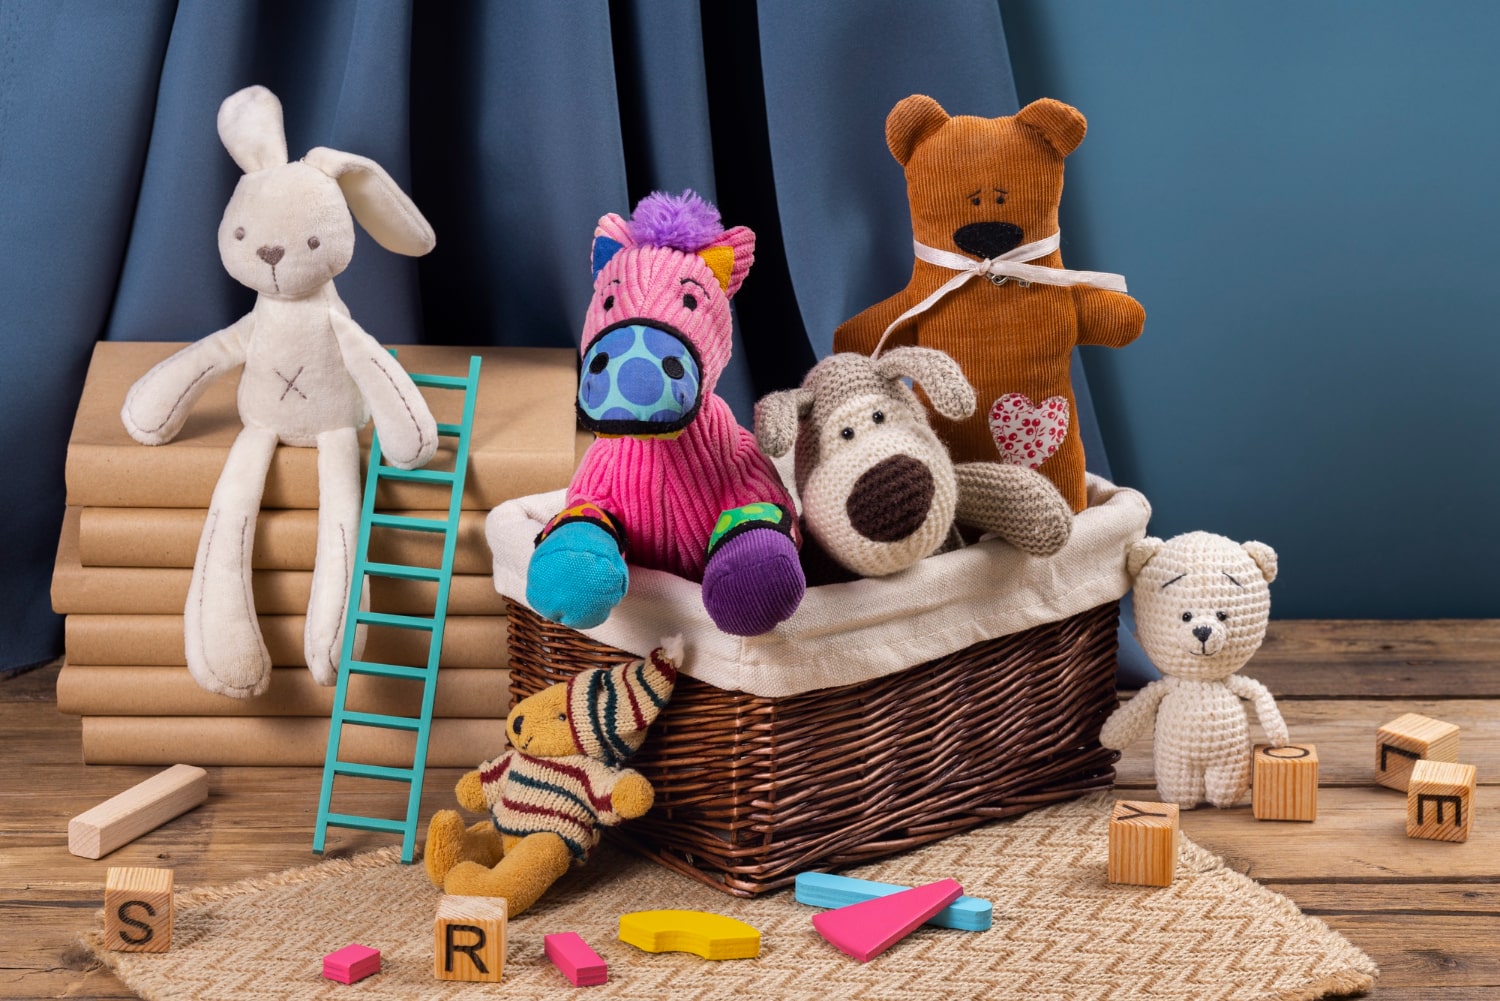 Cuddly companions for little ones, adorable baby shower gifts.